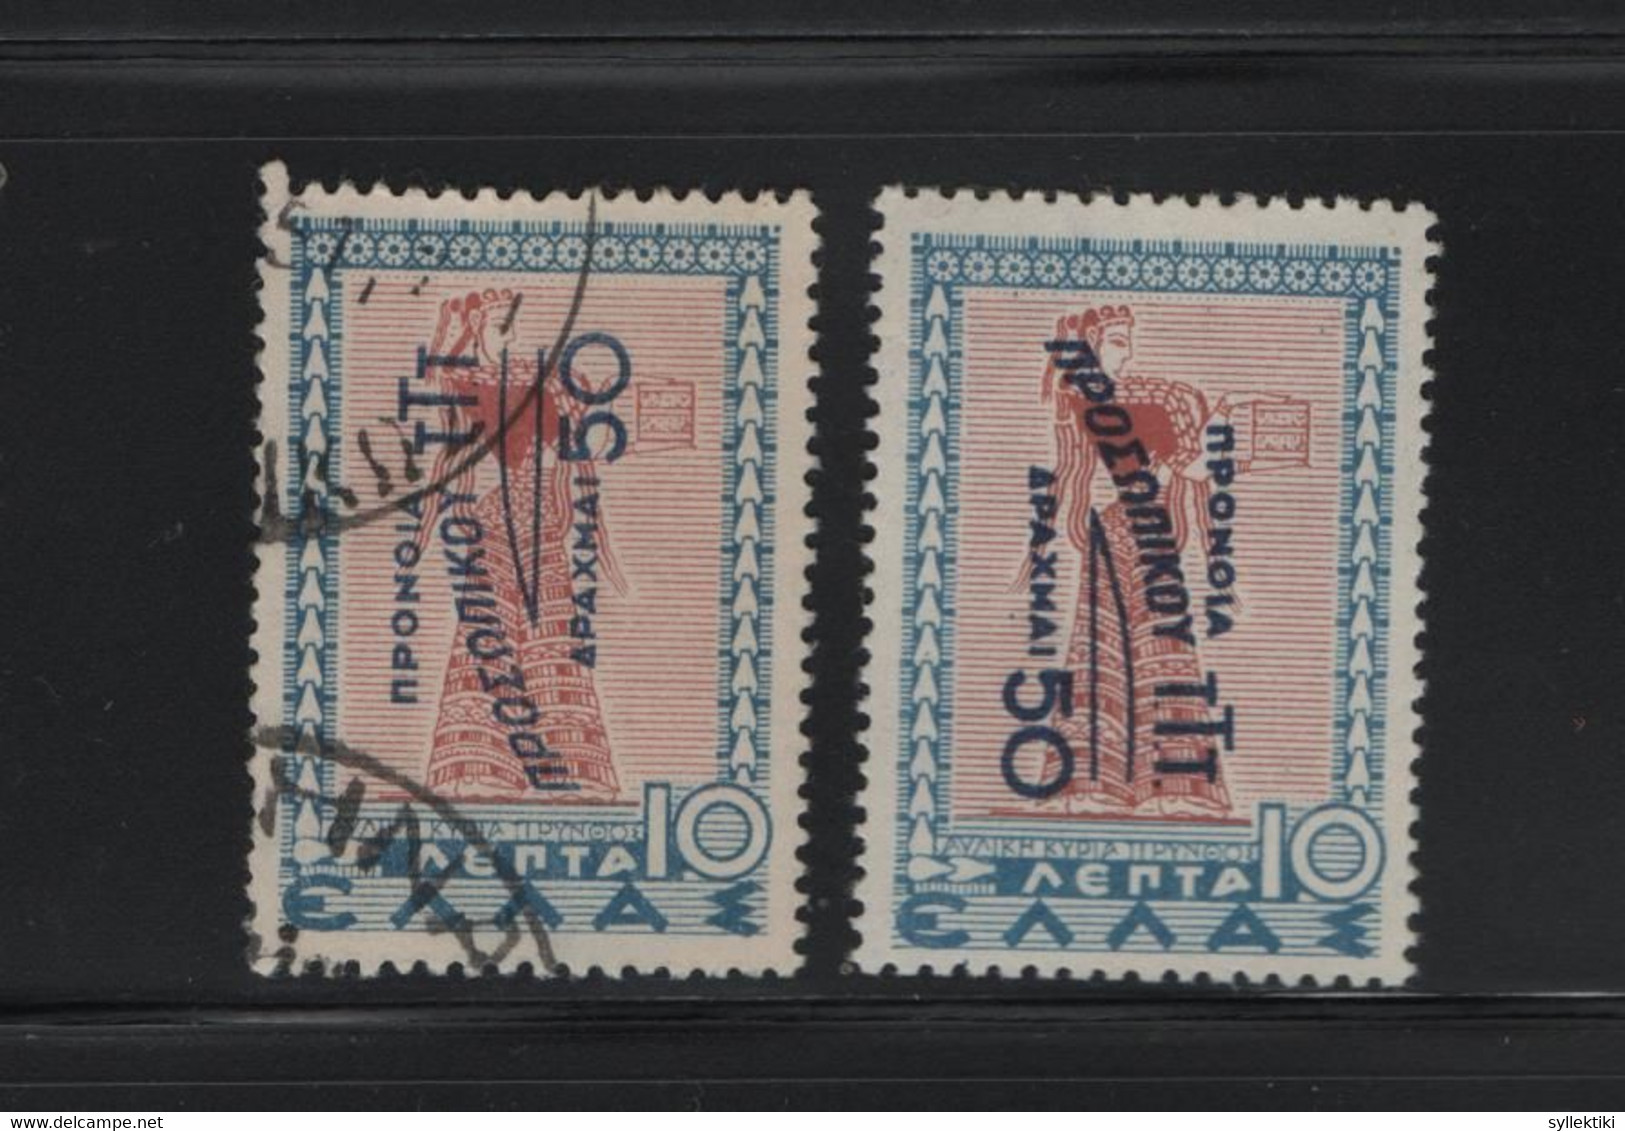 GREECE 1946/50 50 DR / 10 L CHARITY REVERSED OVERPRINT NO GUM STAMP - Beneficenza